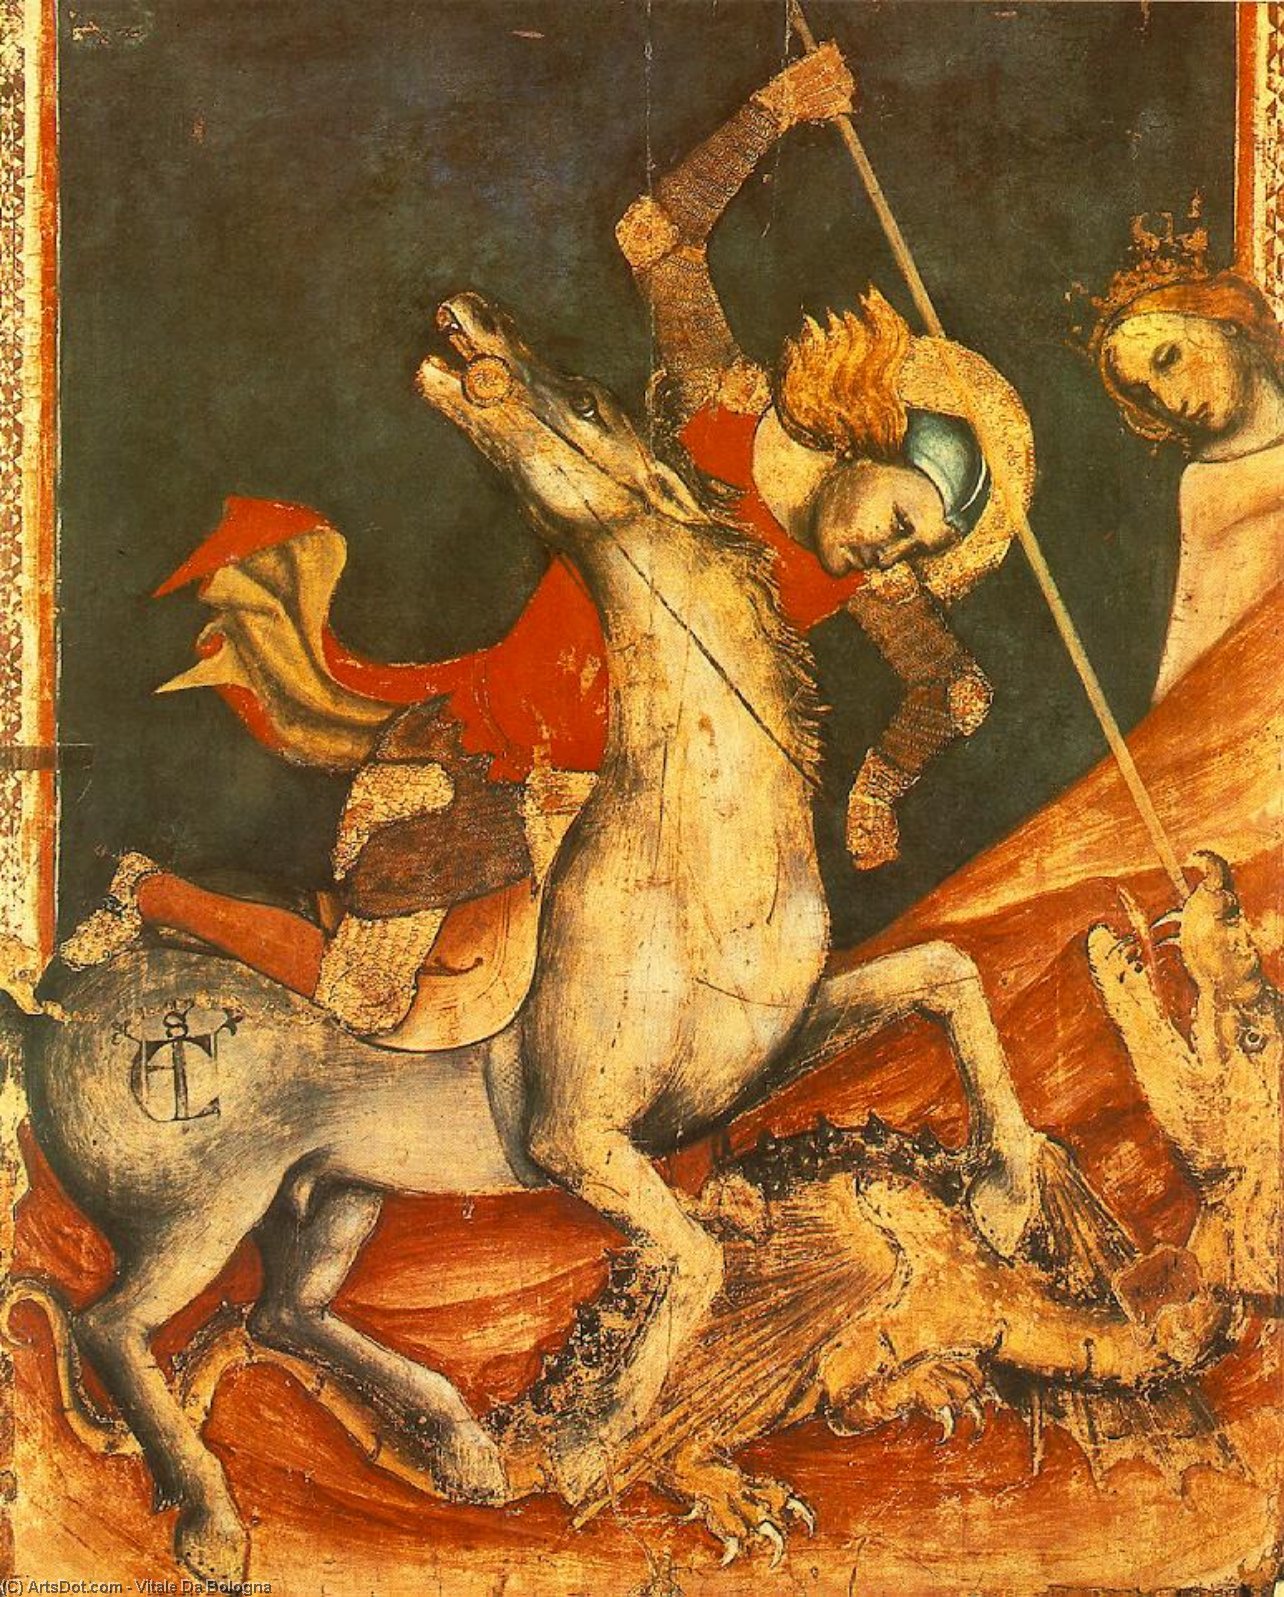 Buy Museum Art Reproductions St George `s Battle with the Dragon by Vitale Da Bologna (1299-1365, Italy) | ArtsDot.com